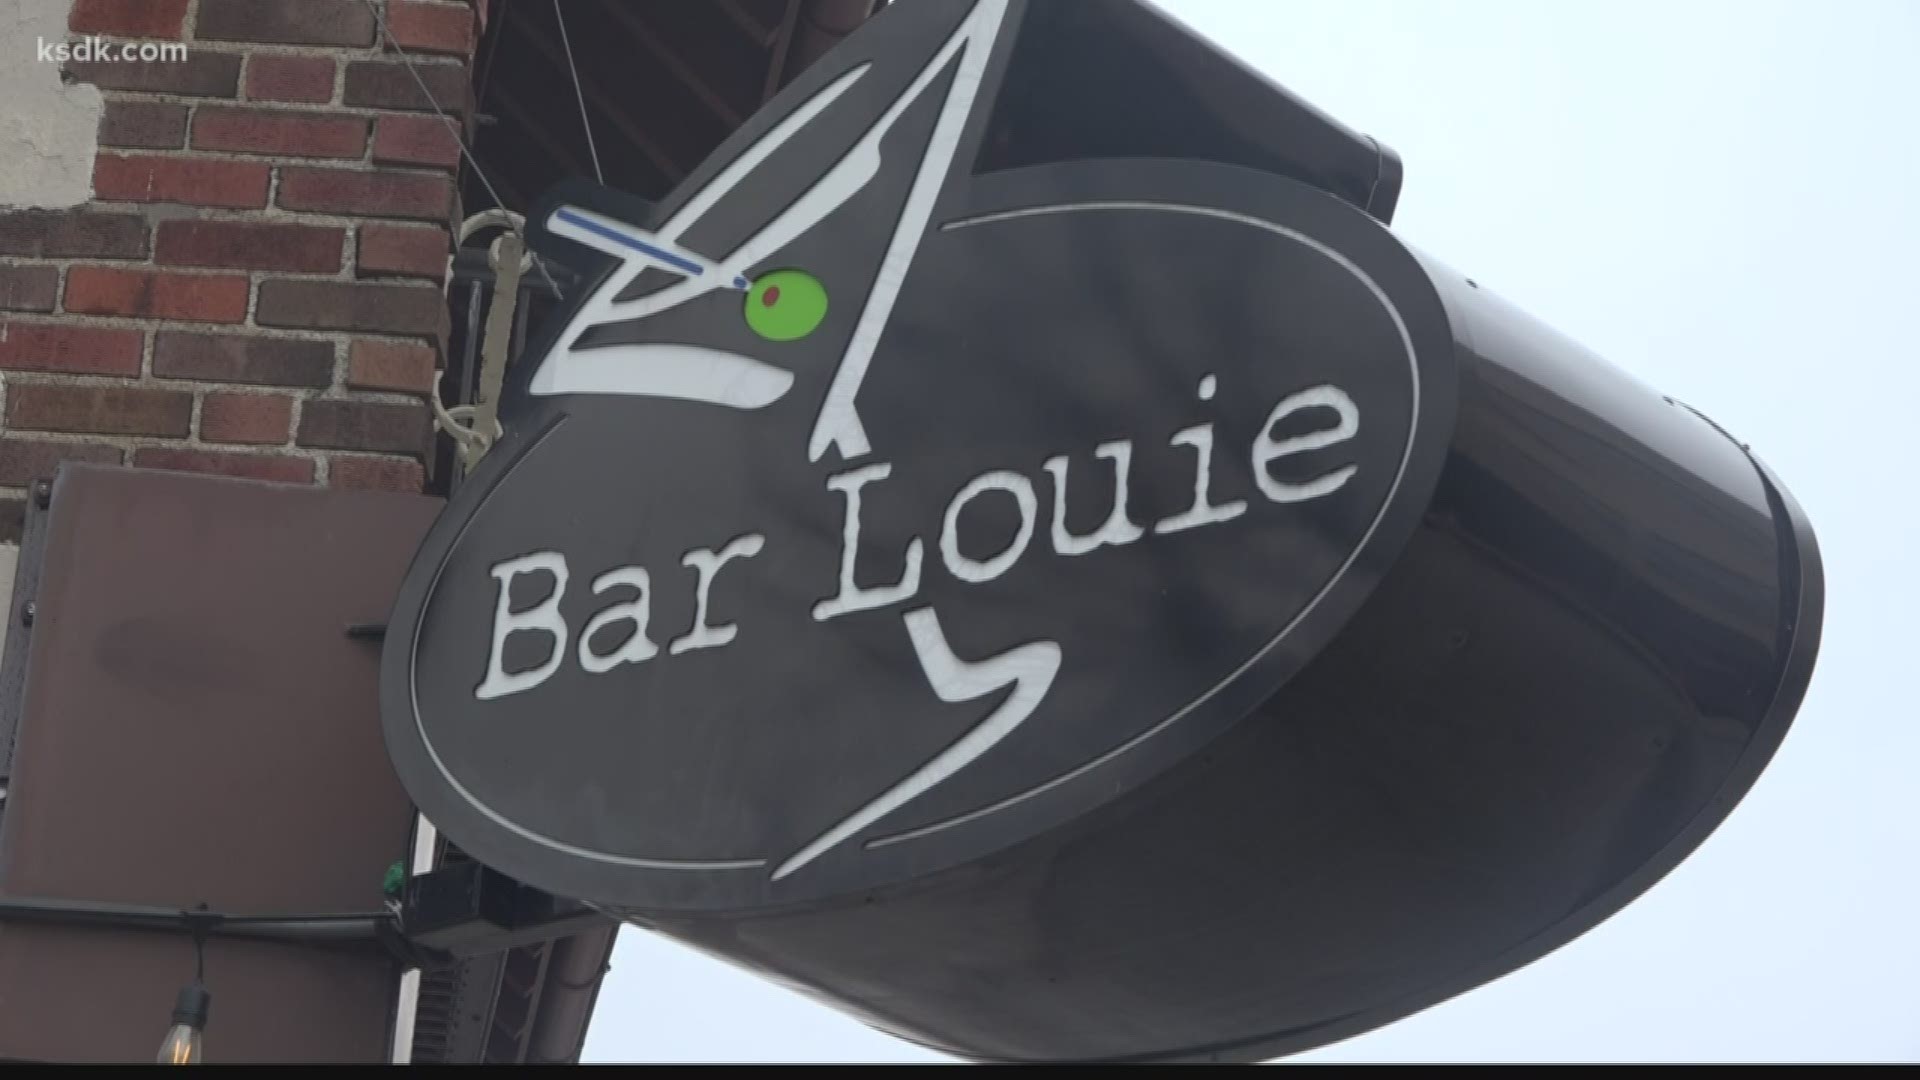 Bar Louie abruptly closed on Jan. 25